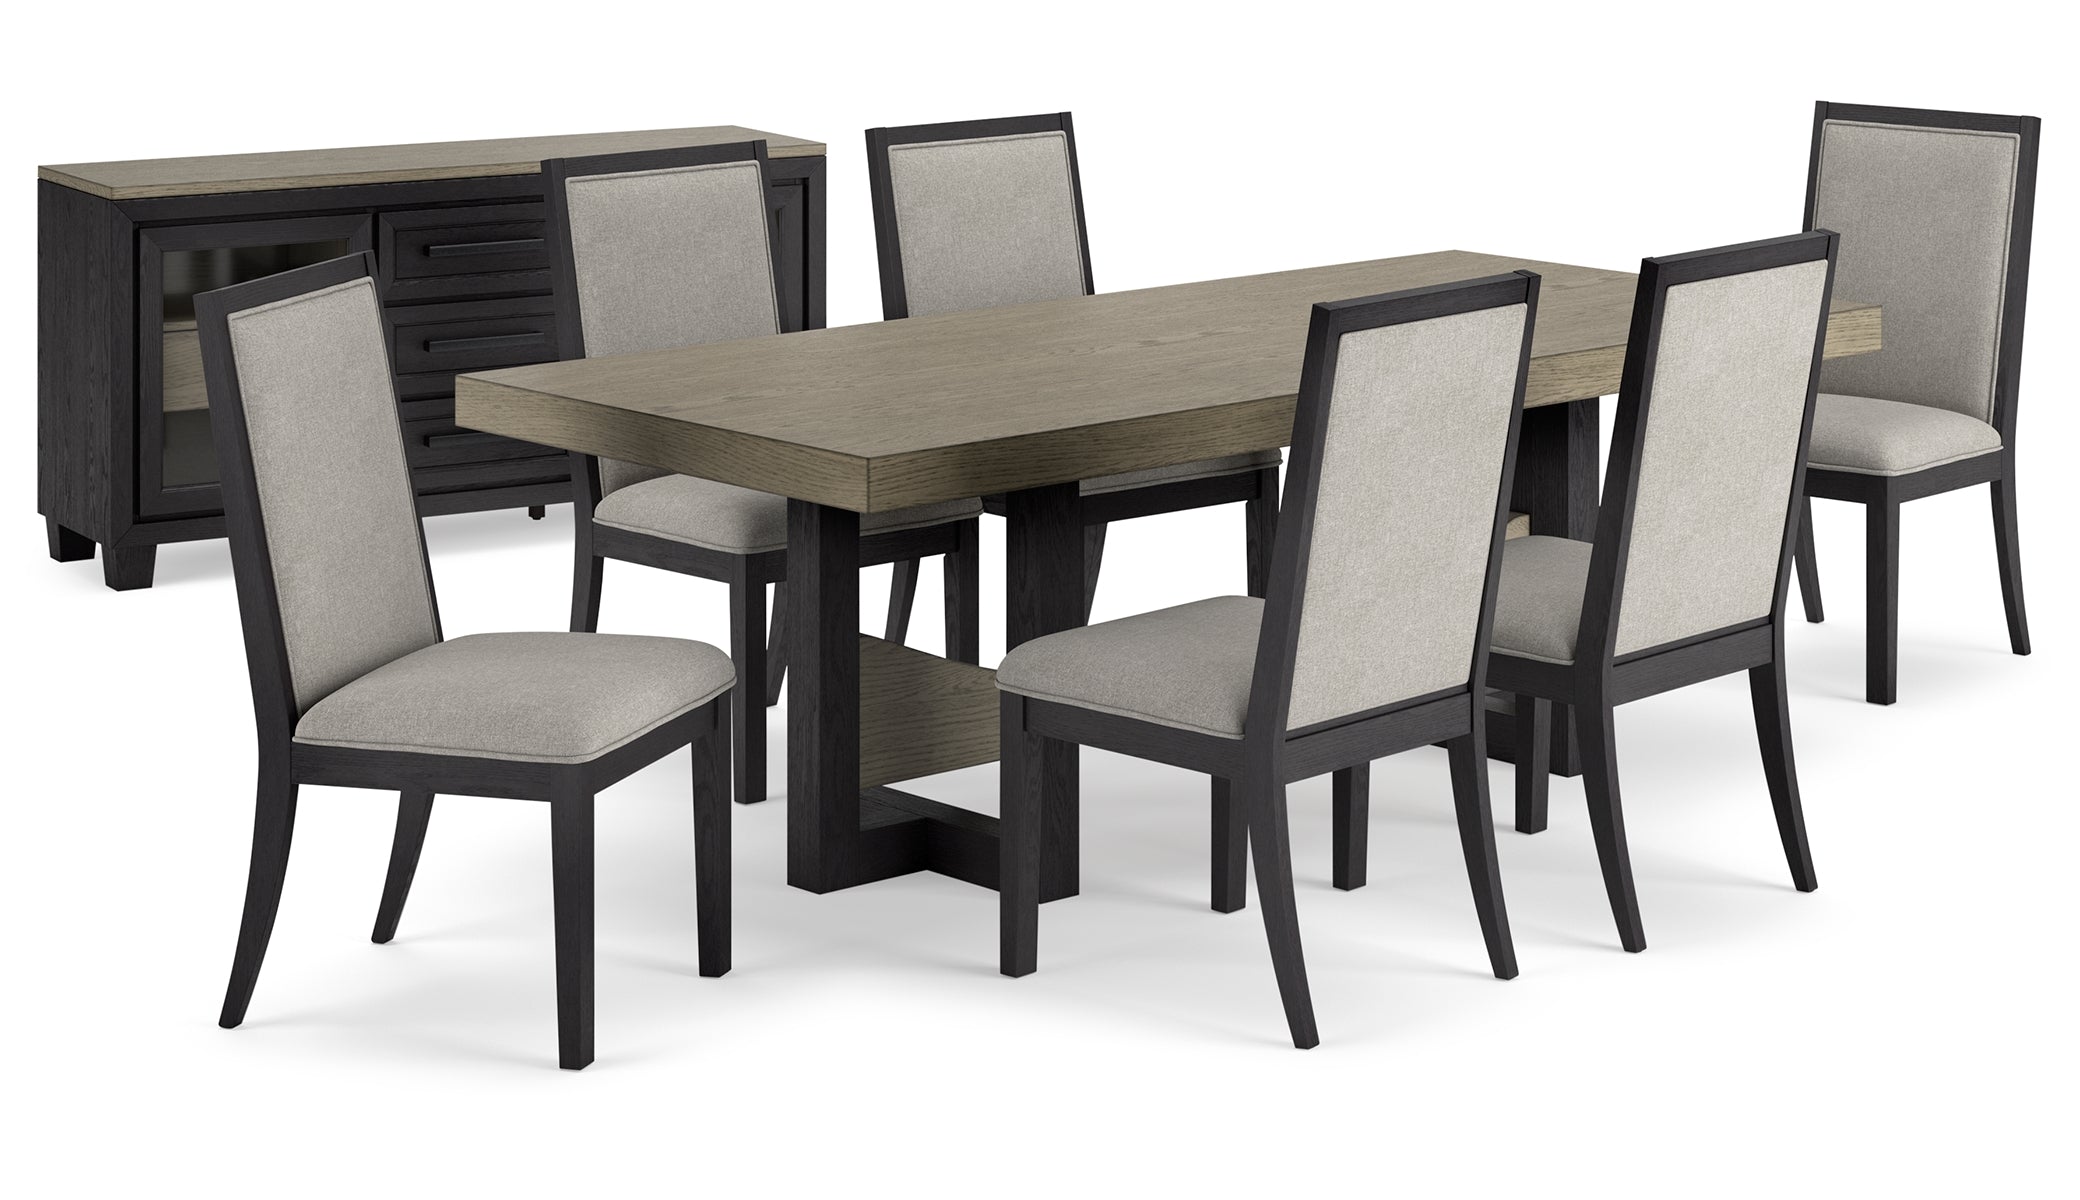 Foyland Dining Table and 6 Chairs with Storage